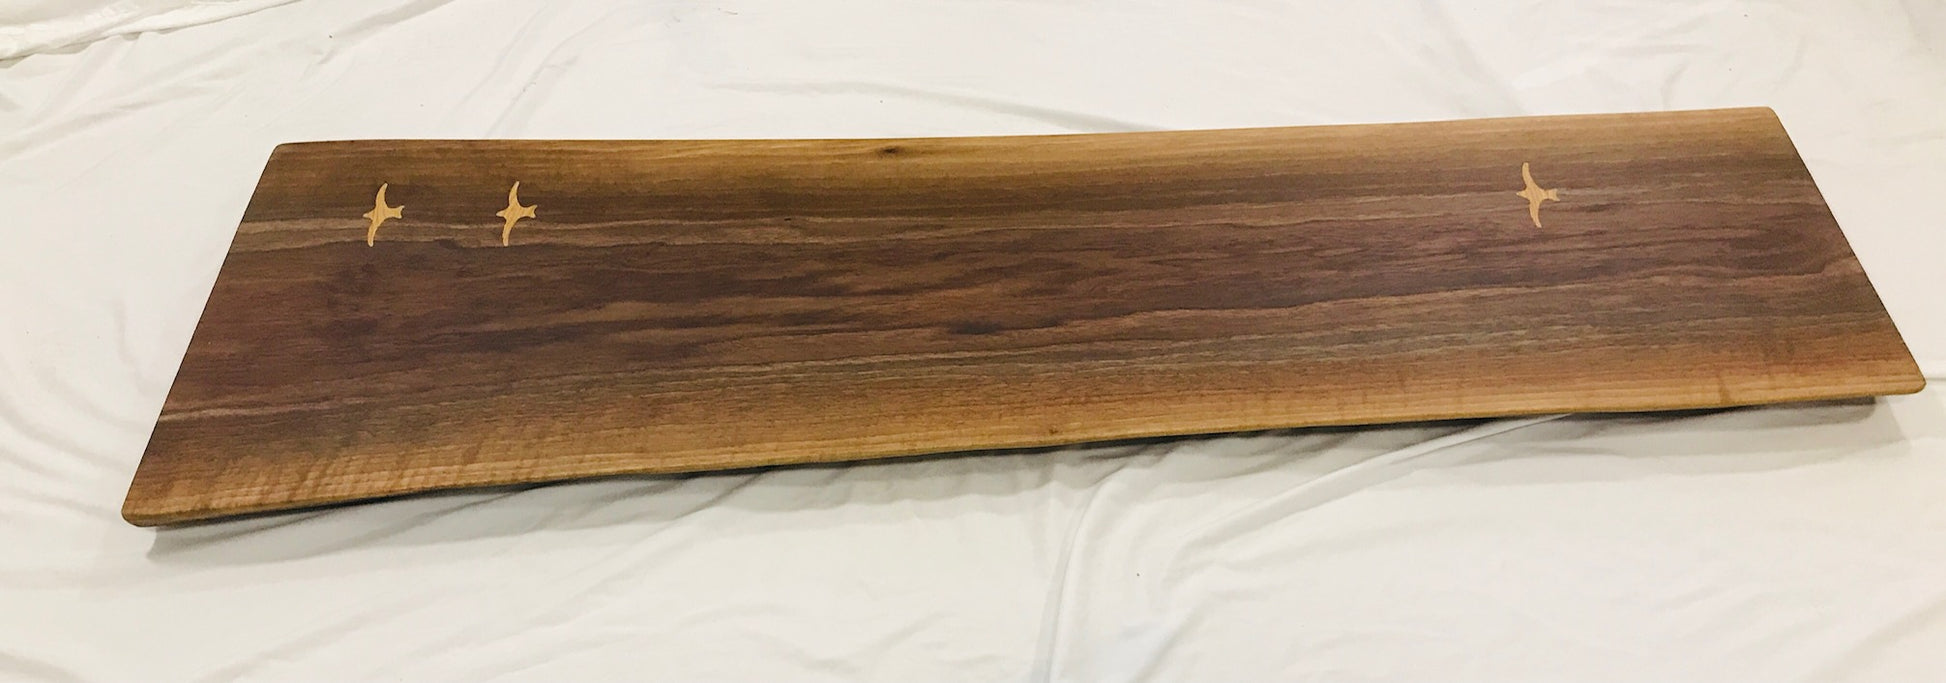 Walnut Live Edge Slab Table/Bench with White Oak Seabird Inlay-Top Side View